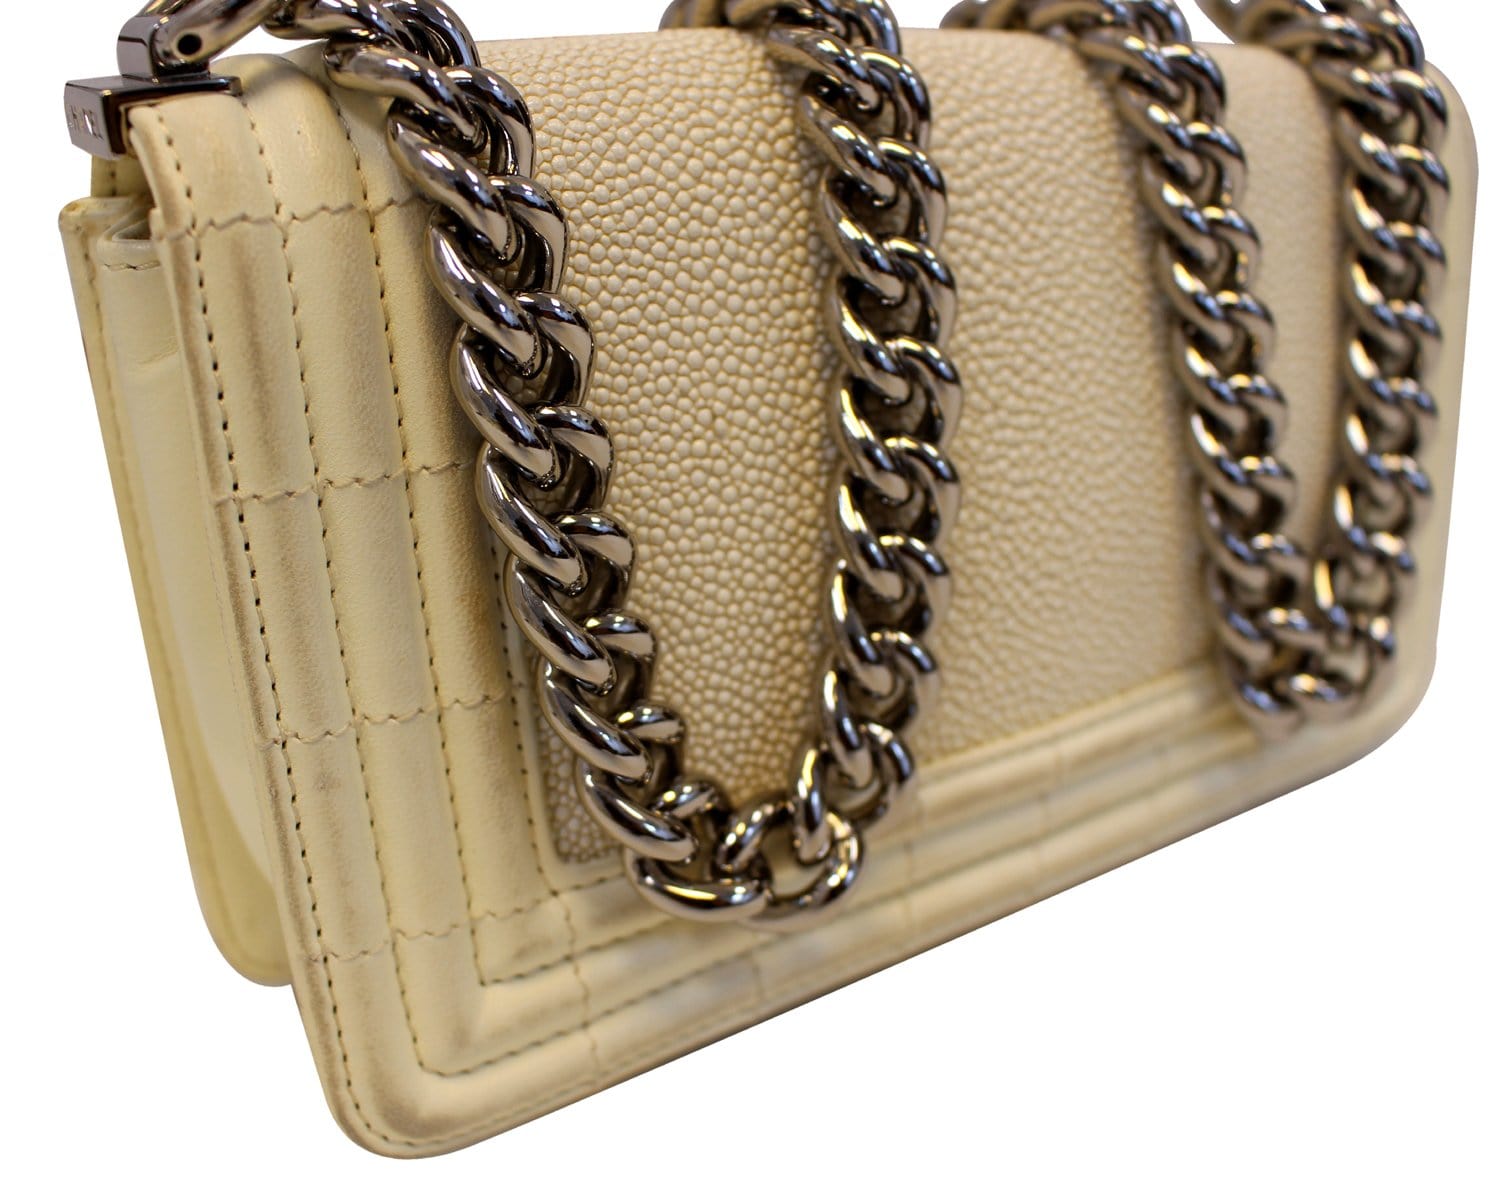 Chanel Vintage WOC Wallet on Chain - white/gold